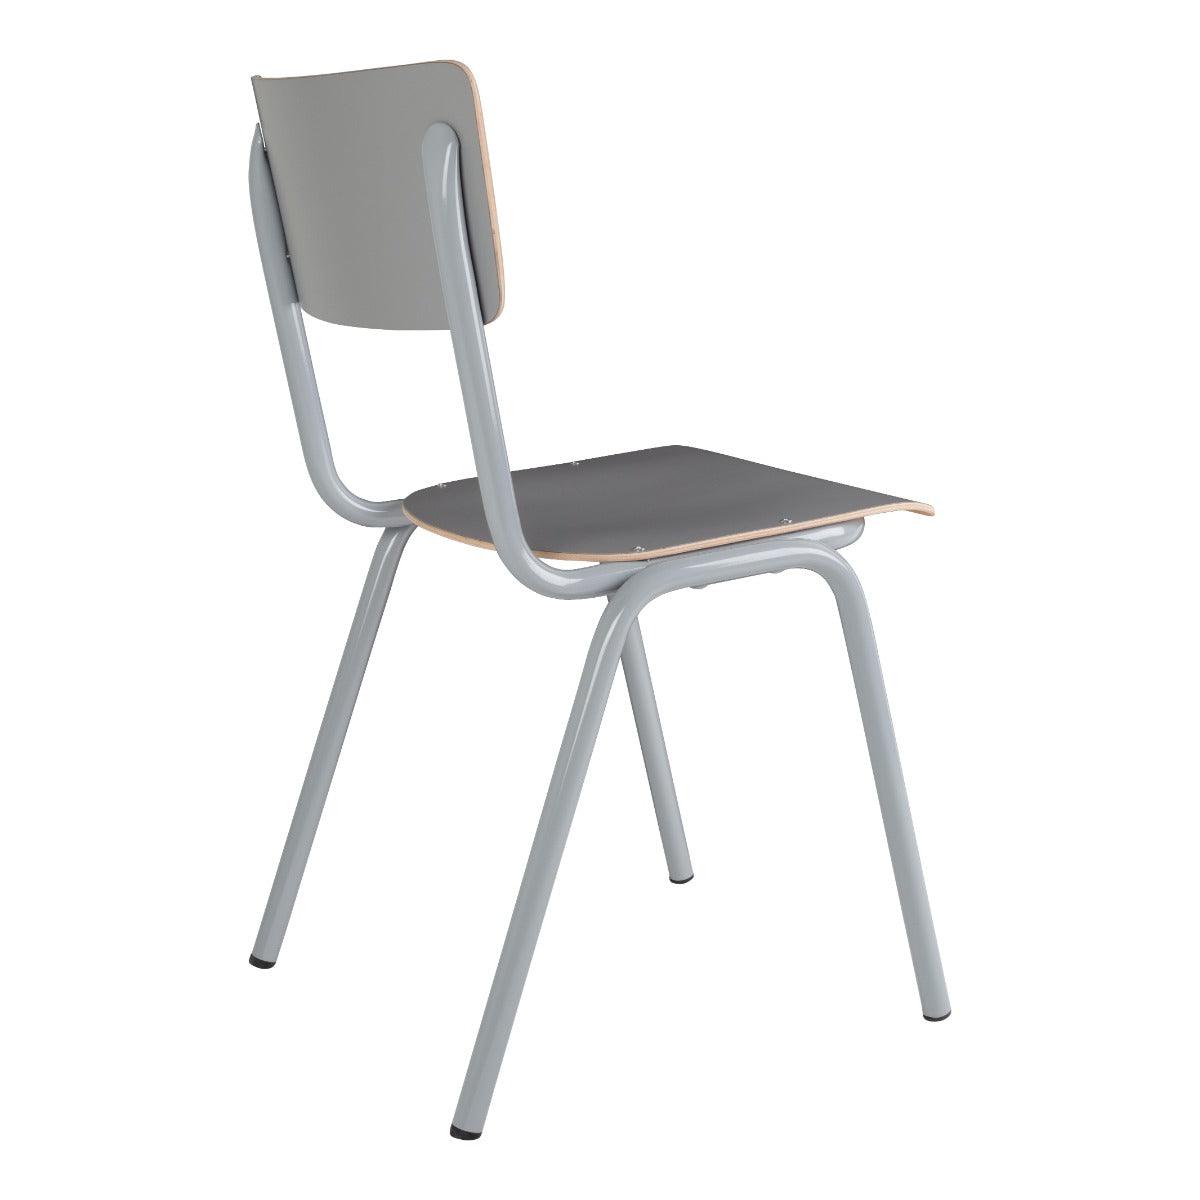 BACK TO SCHOOL chair grey, Zuiver, Eye on Design